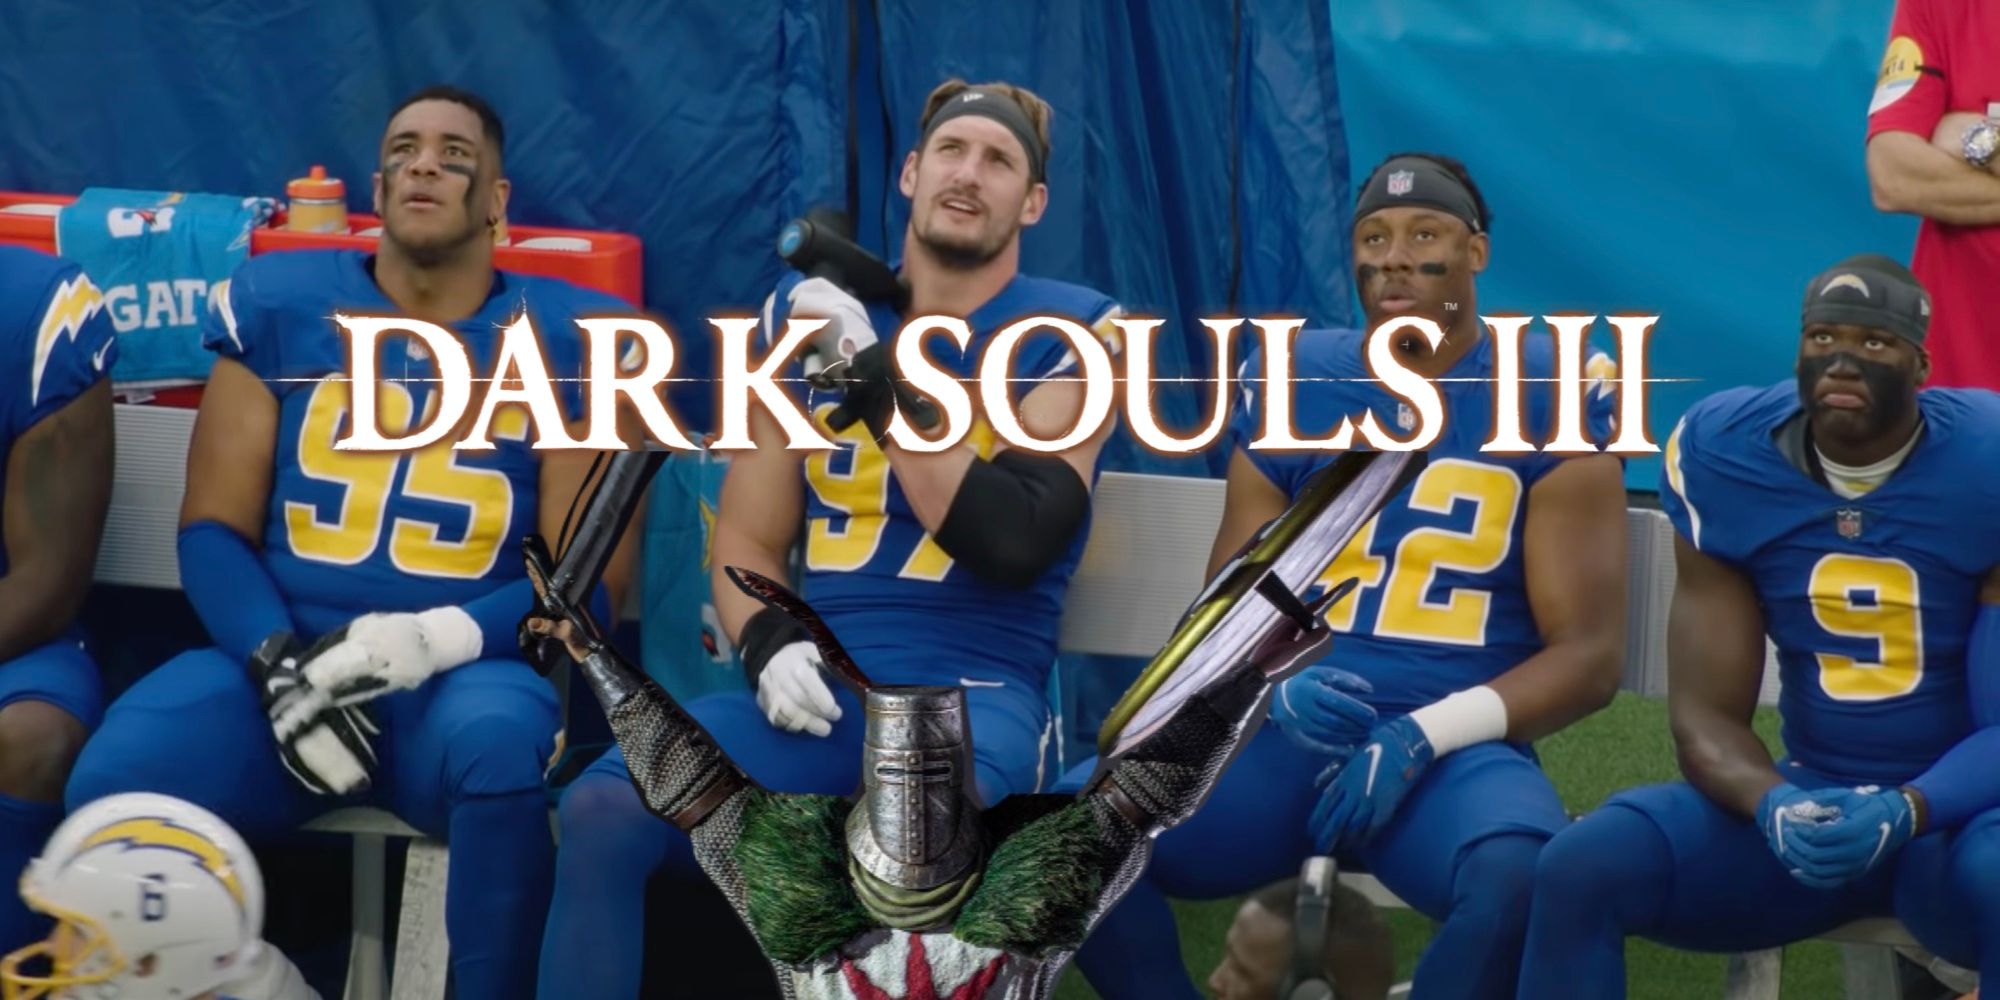 LA Chargers Joey Bosa Praises The Sun, Alluding To Dark Souls 3